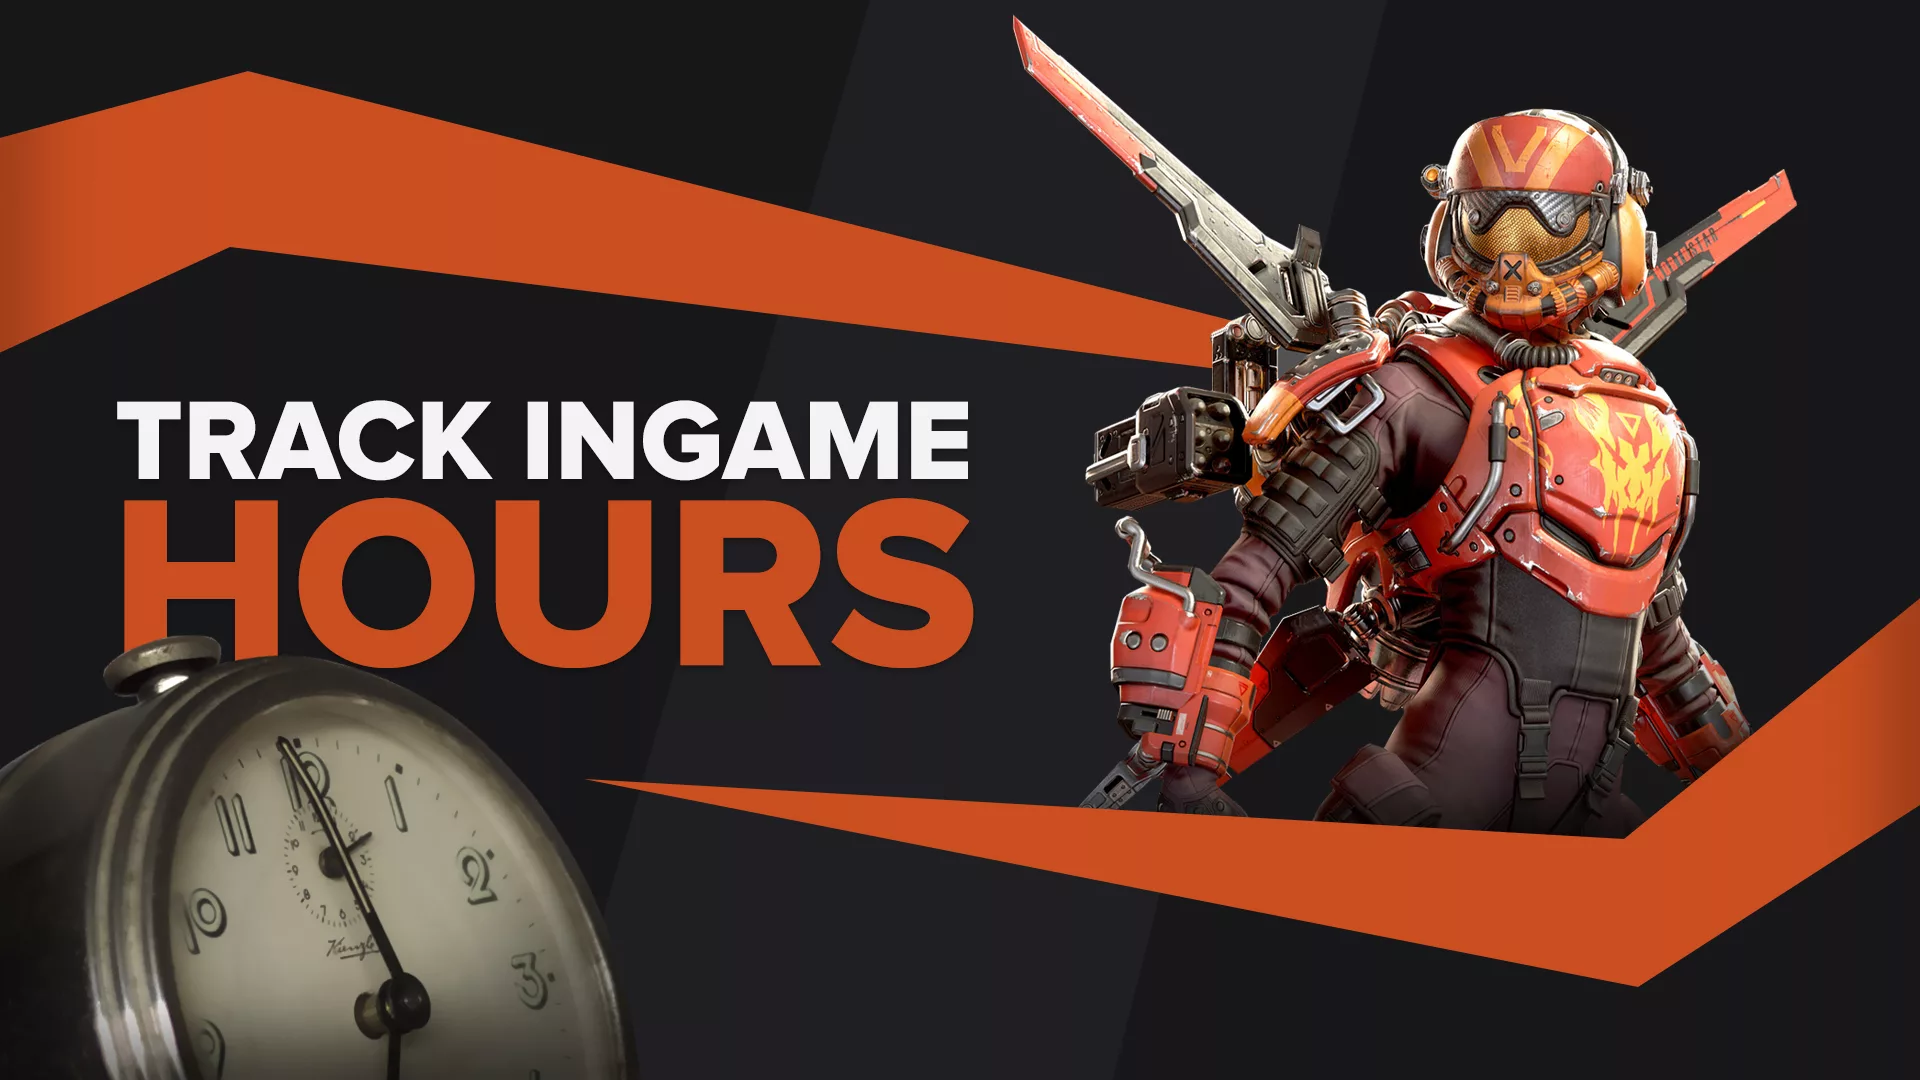 How to check Your playtime in Apex Legends!